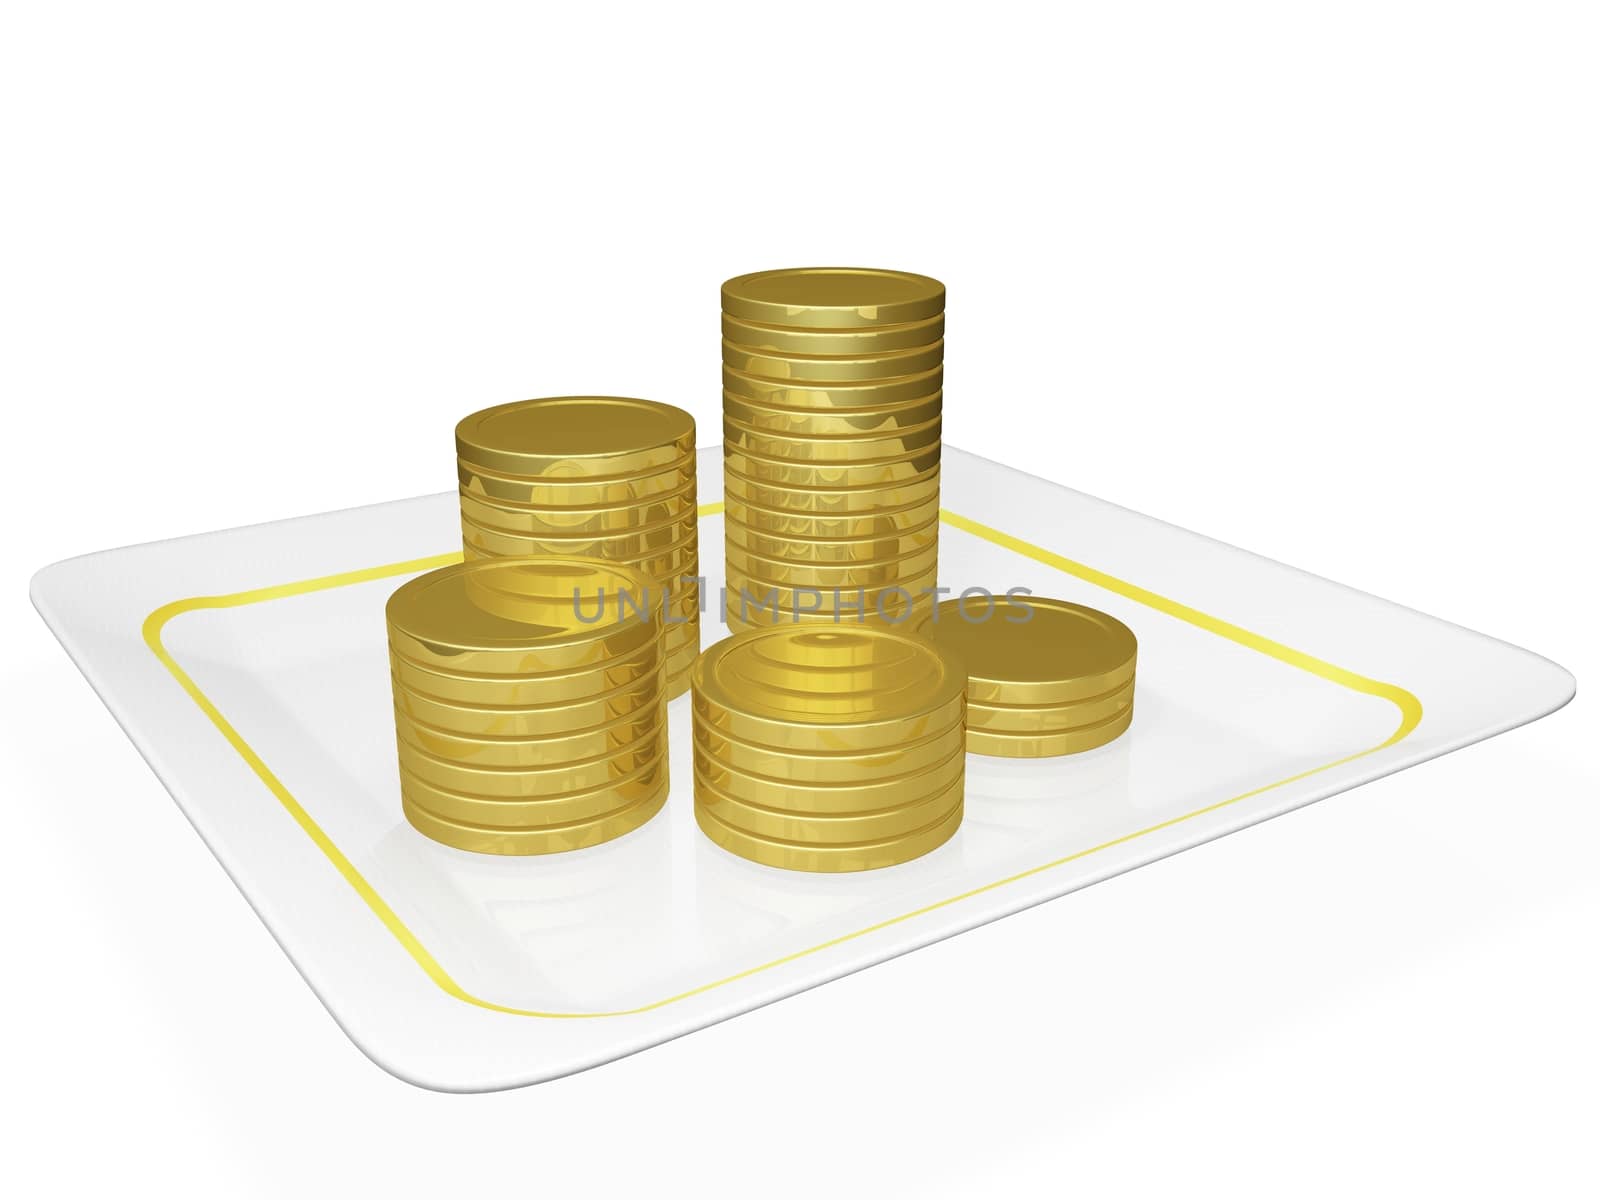 Golden Coins Stacked on a Ceramic Platter by RichieThakur